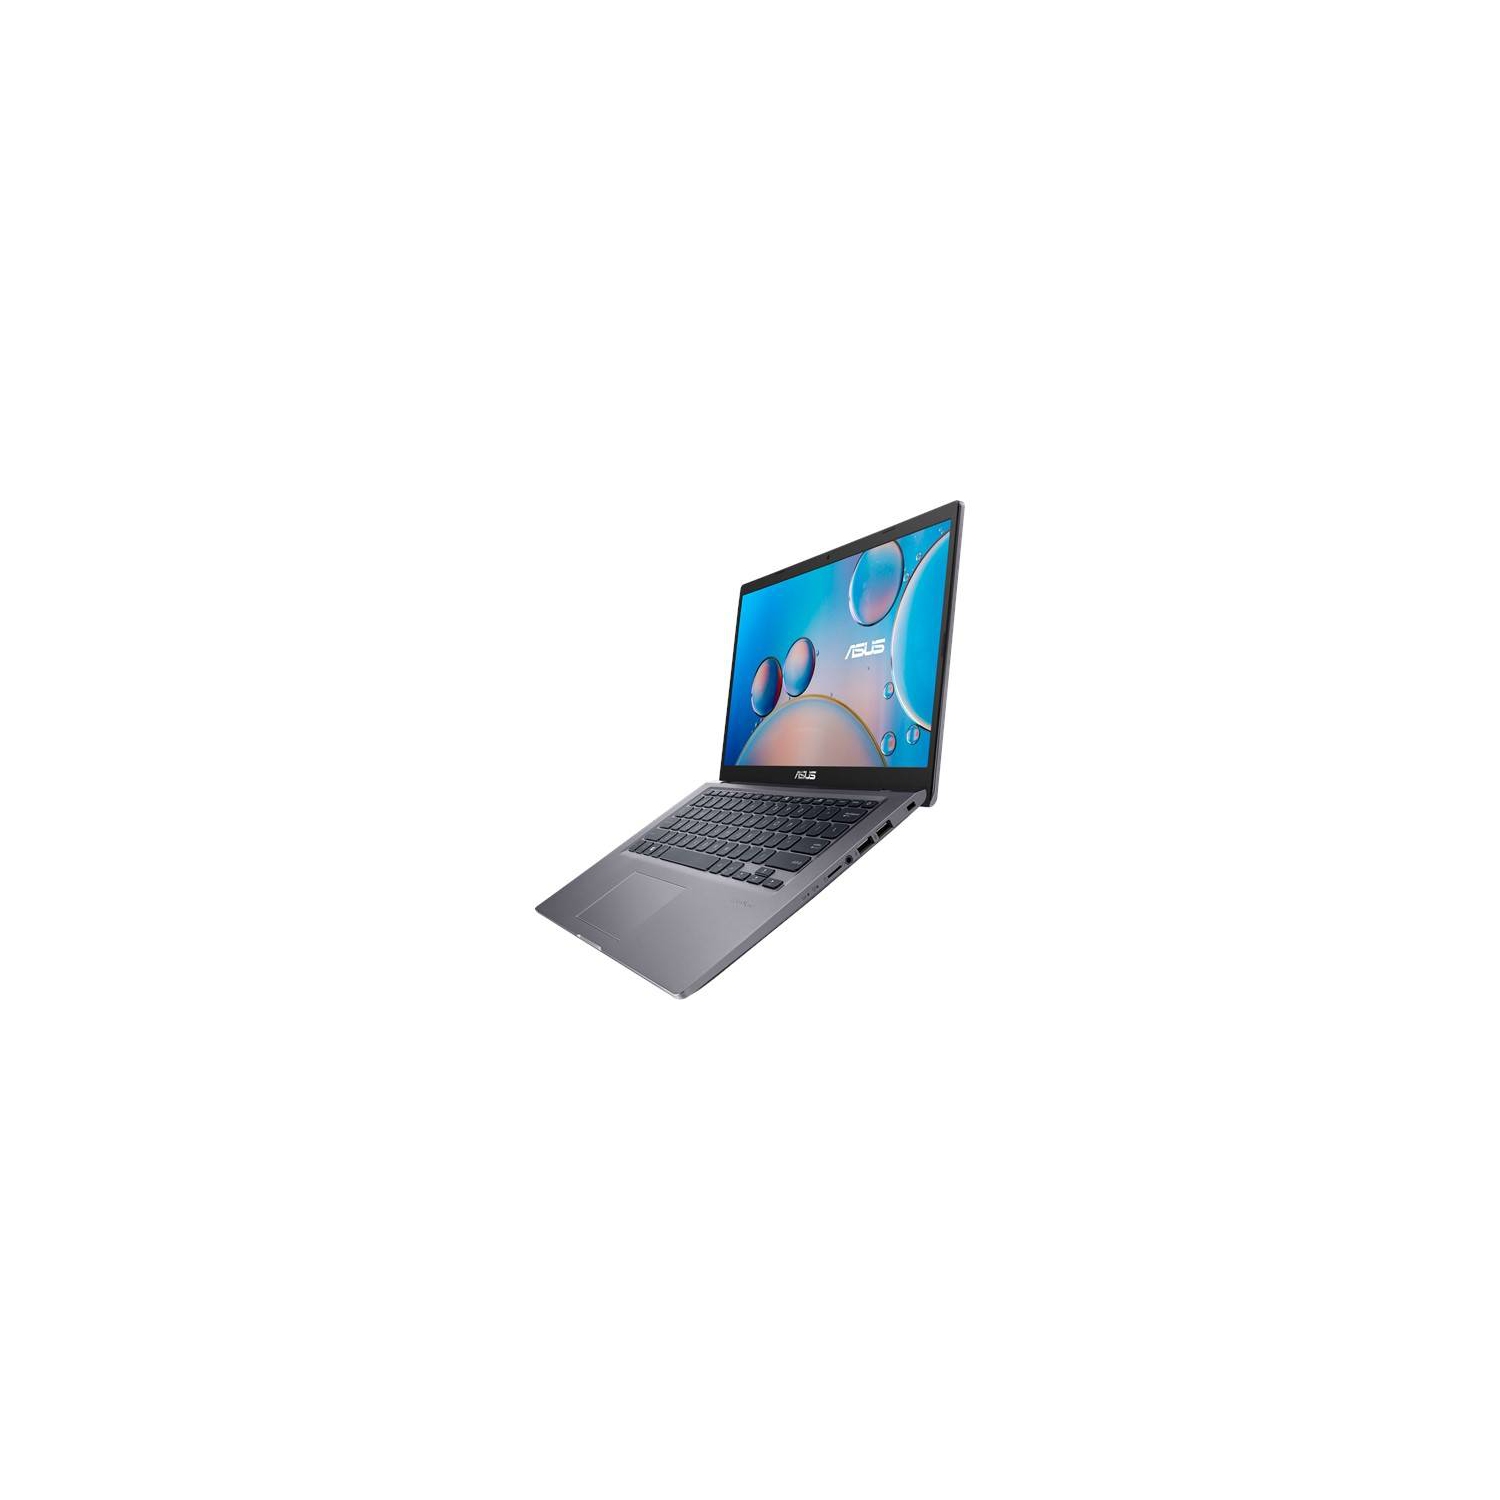 Refurbished (Excellent) ASUS X415JA-TS31-CB 14" Notebook with Intel® i3-1005G1, 8GB DDR4, 256GB SSD, Intel UHD Graphics & Windows 10 Home - Slate Grey